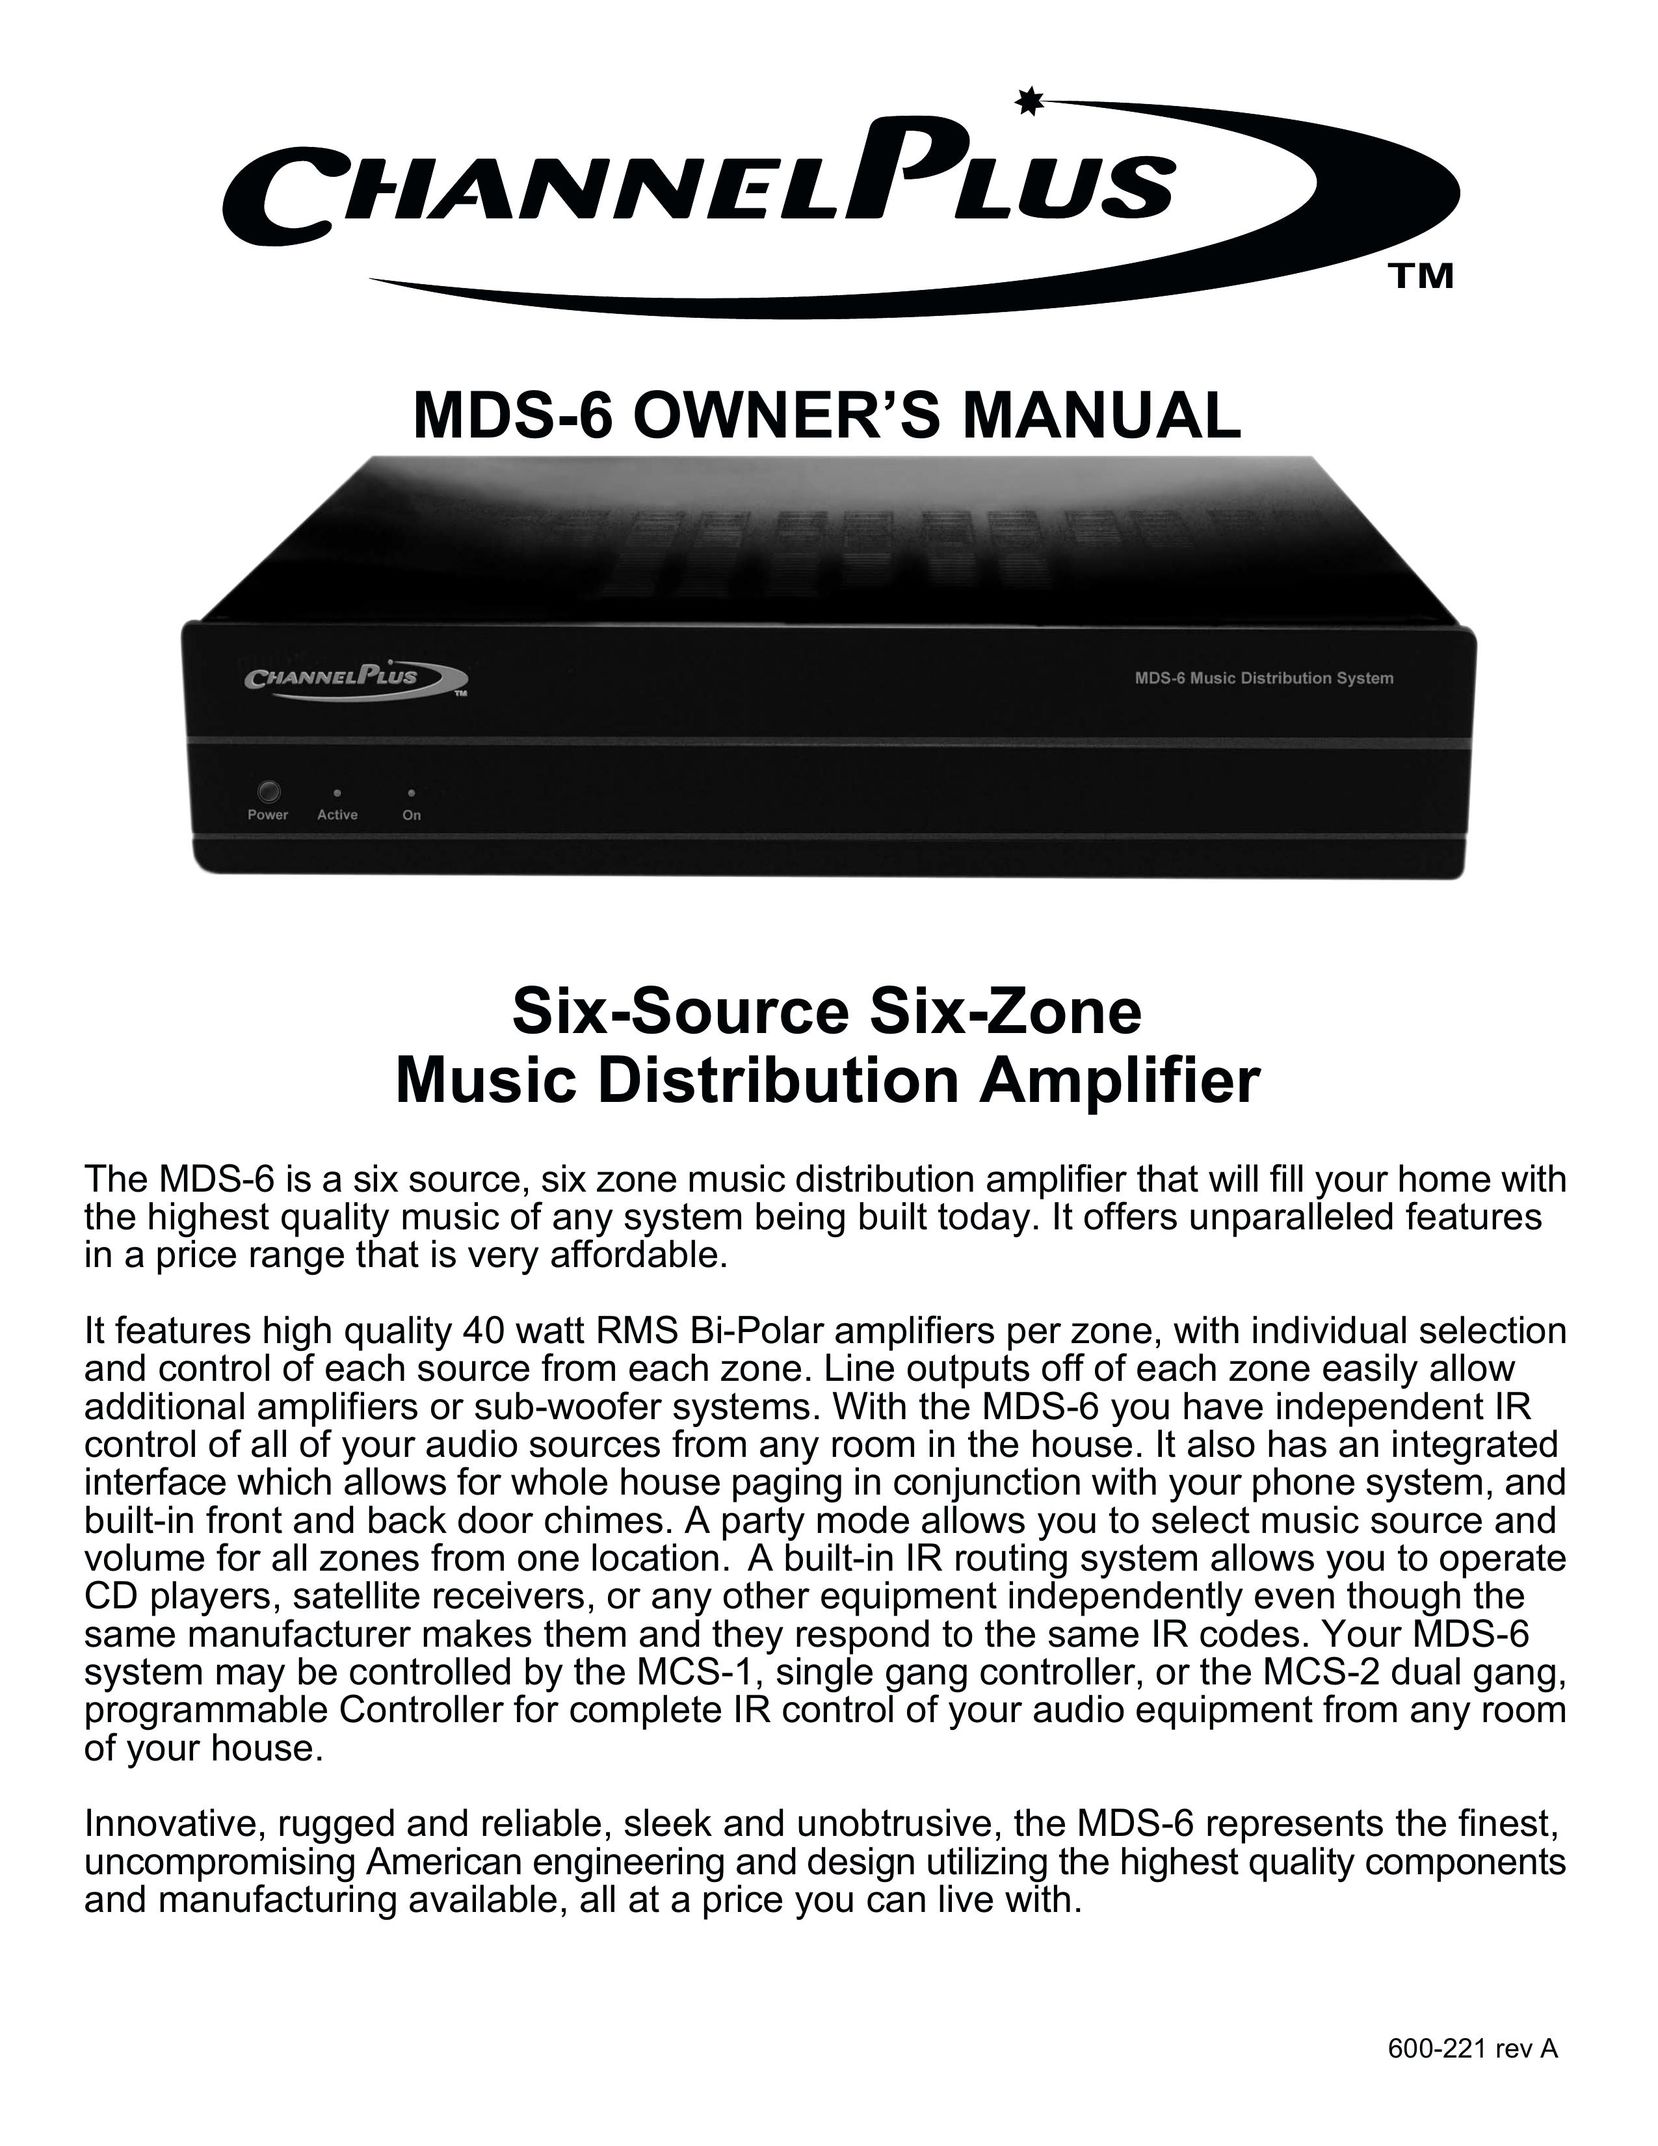 Channel Plus MDS-6 Stereo Amplifier User Manual